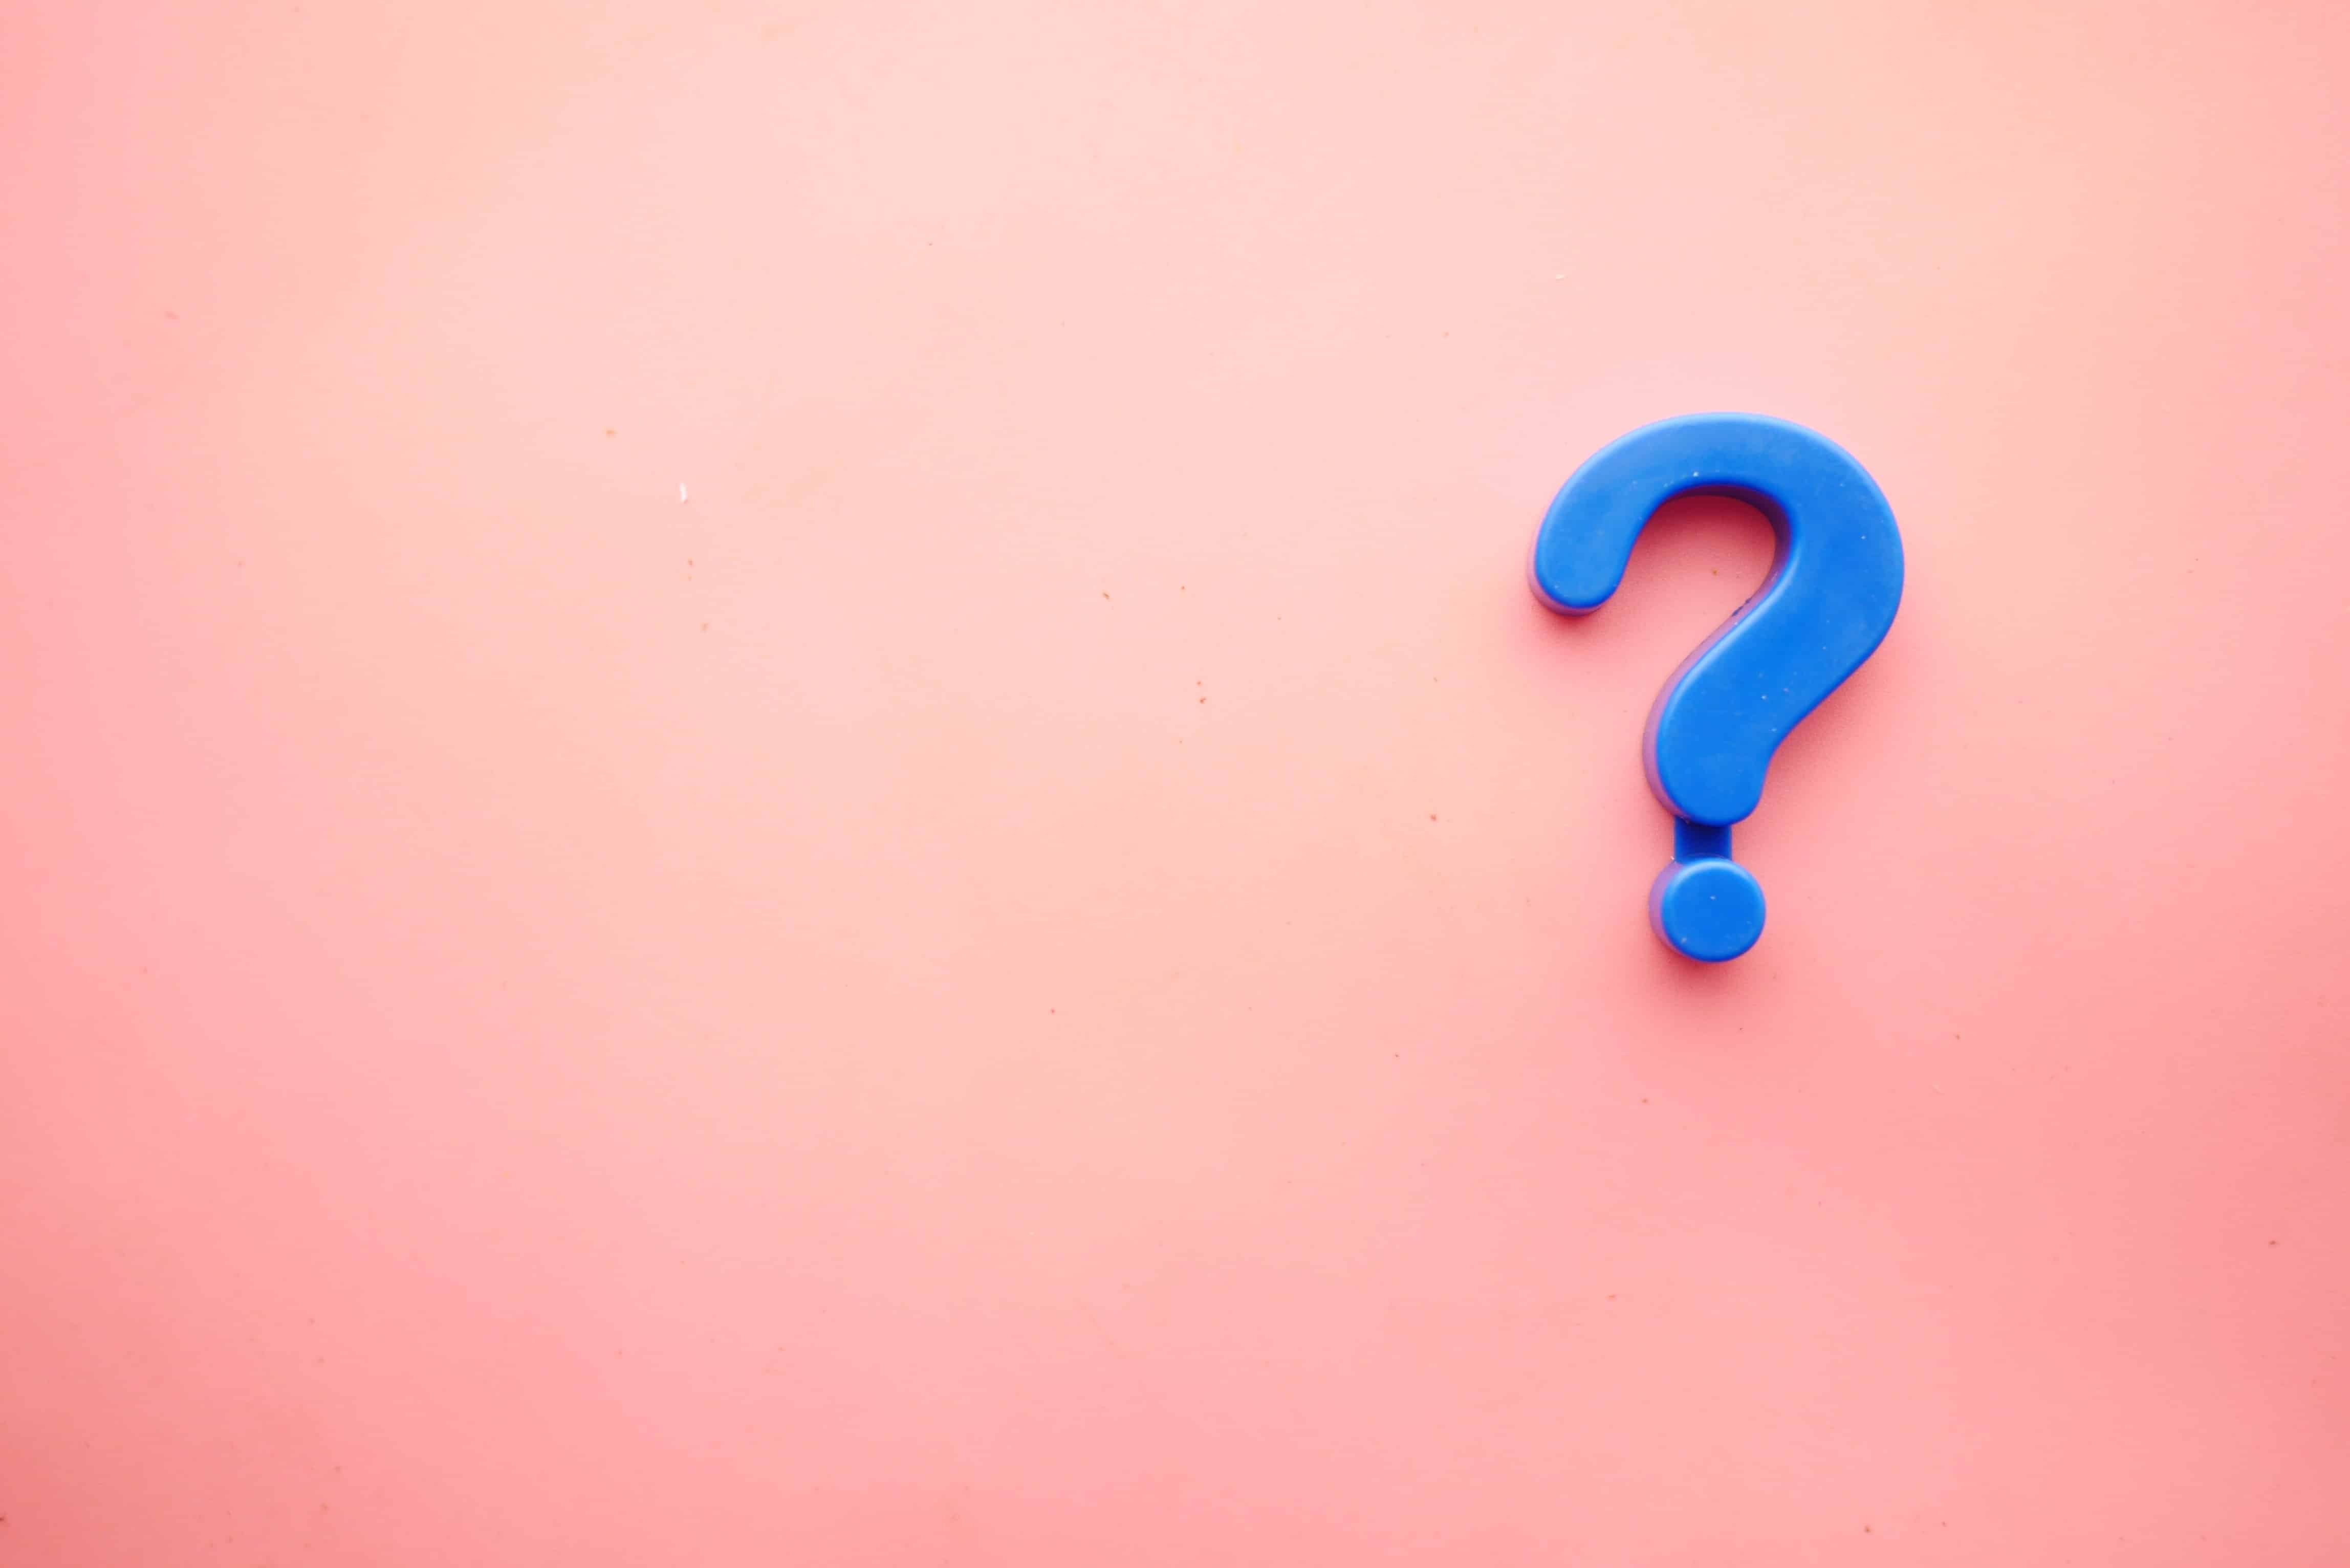 big question mark on a pink background